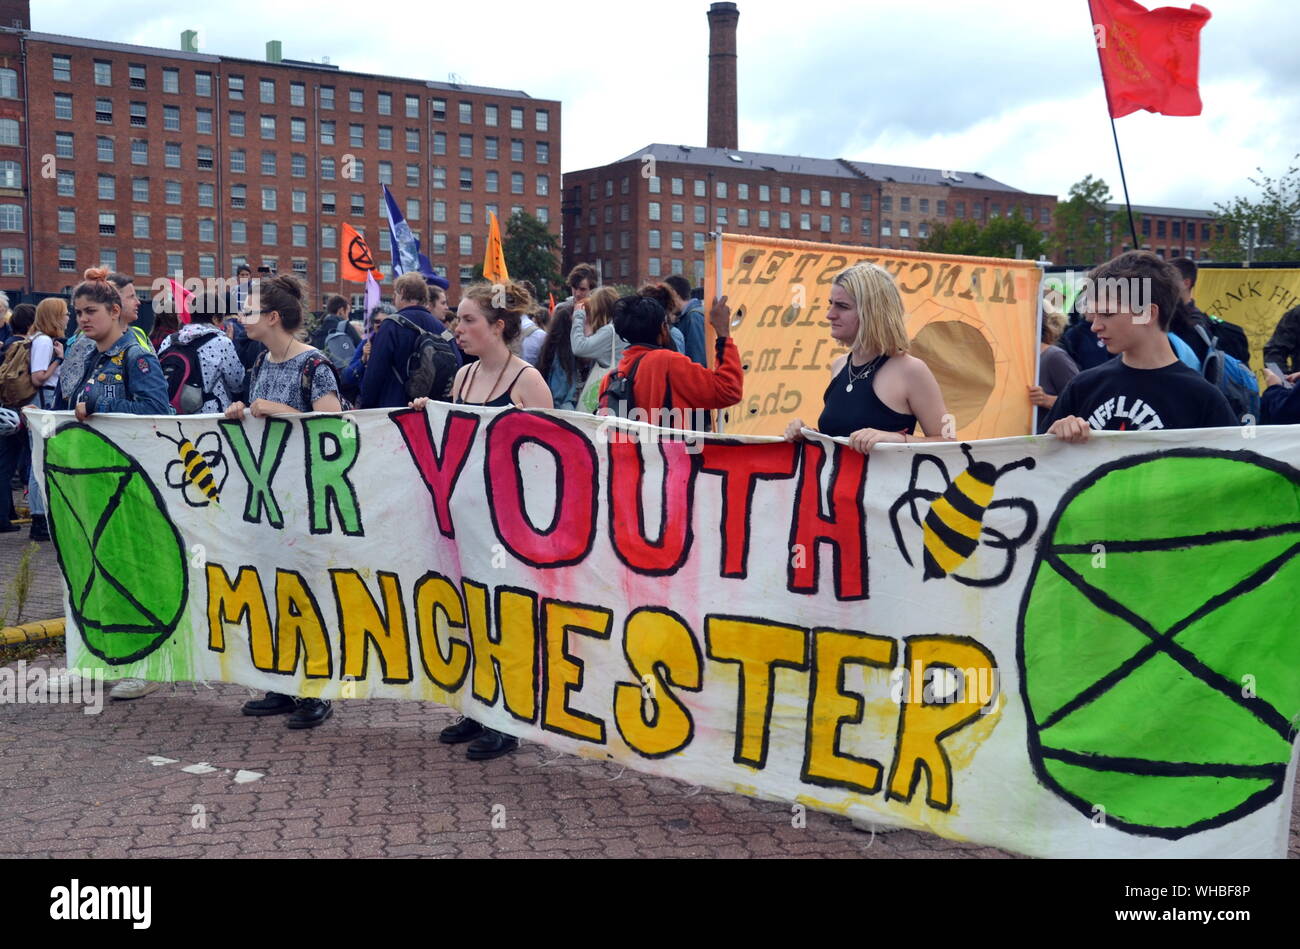 Members of XR Youth Manchester took a prominent role as Northern Rebellion protesters, part of the global movement Extinction Rebellion, marched through Manchester, uk, and held a series of die-ins to urge for action on climate change on September 2nd, 2019. Protest sites included Barclays Bank, a Primark store and HSBC Bank. This was the fourth day of a protest which blocked Deansgate, a main road in central Manchester. Stock Photo